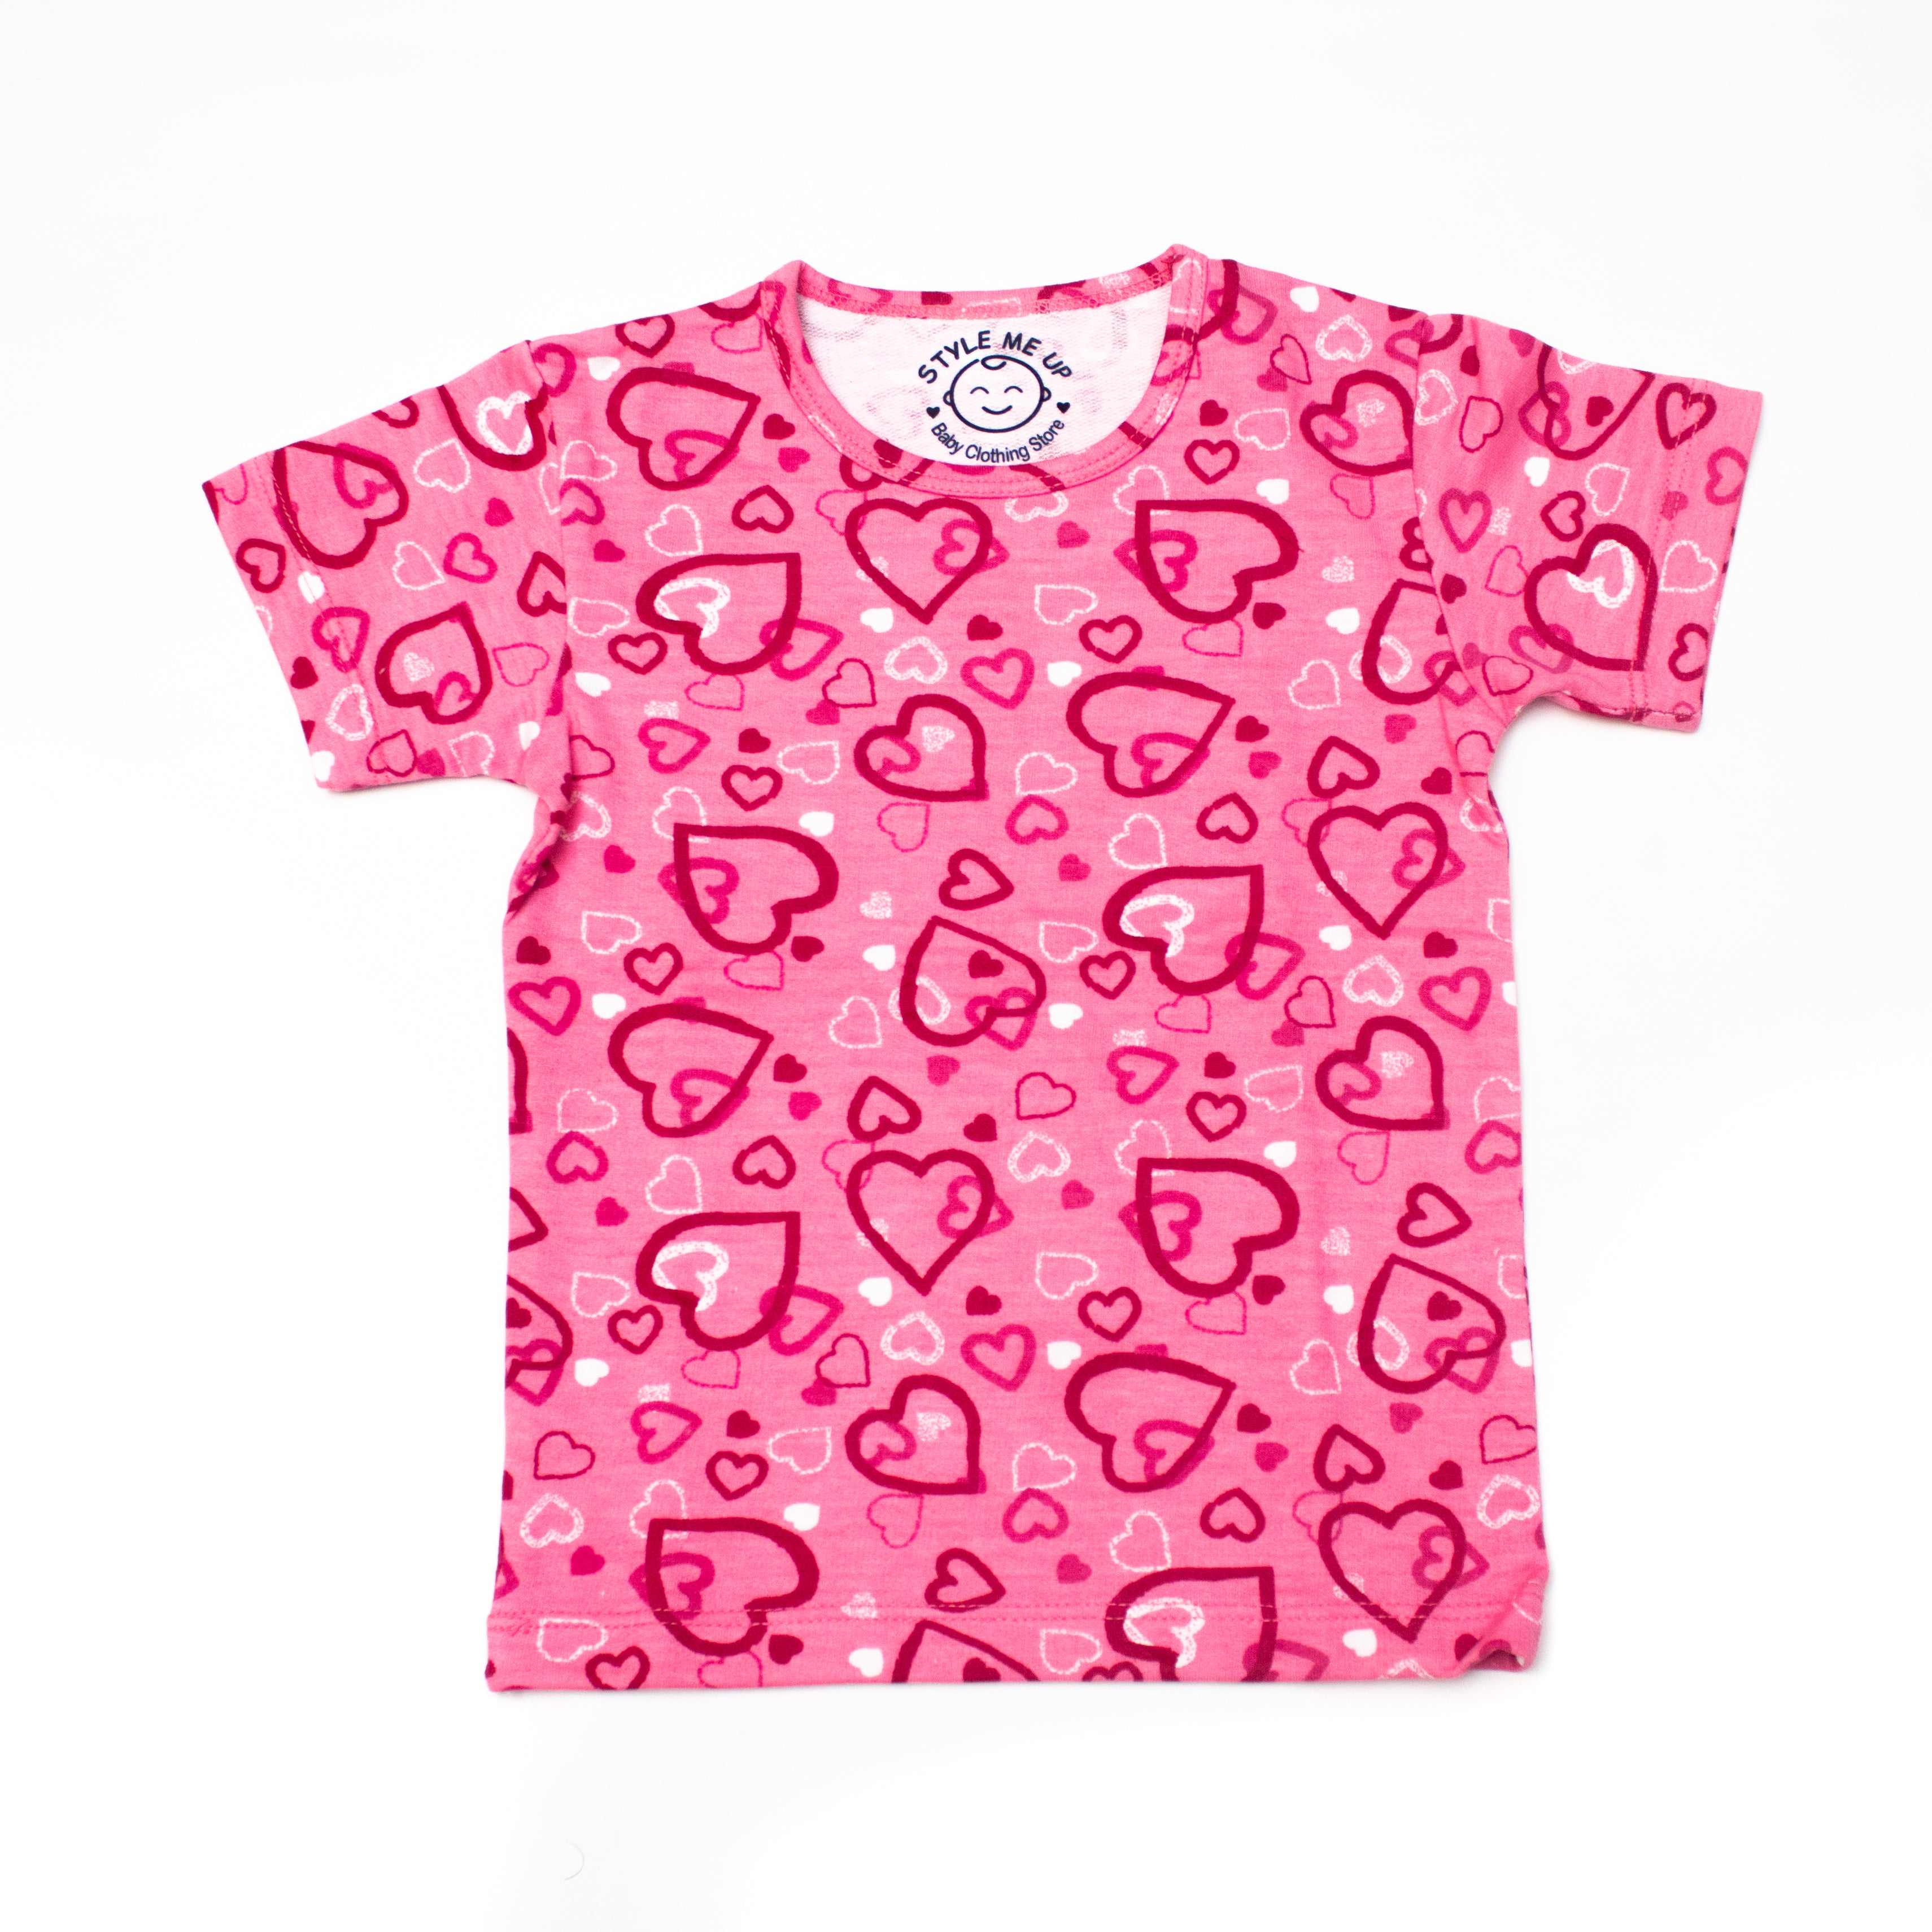 Pink Hearts T-Shirt And Shorts For Kids